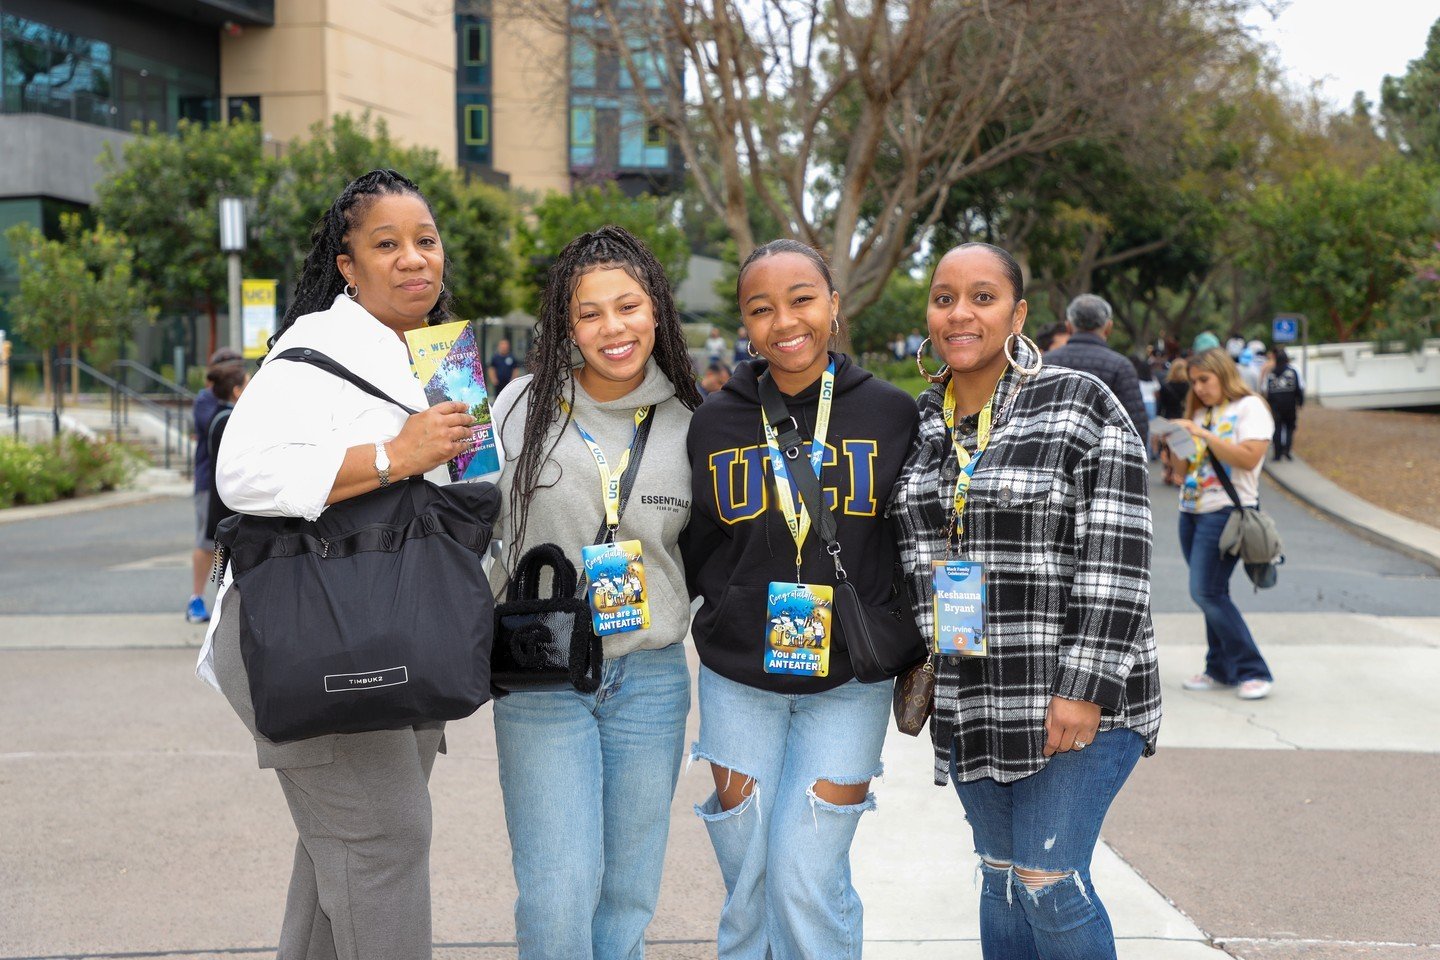 We so enjoyed seeing all of you at Celebrate UCI! We have an entire album full of photos on our Facebook, so be sure to check it out. Can't wait to see you again in the fall! 🤘💙💛 #FutureAnteater #CelebrateUCI #UCIYes #UCI